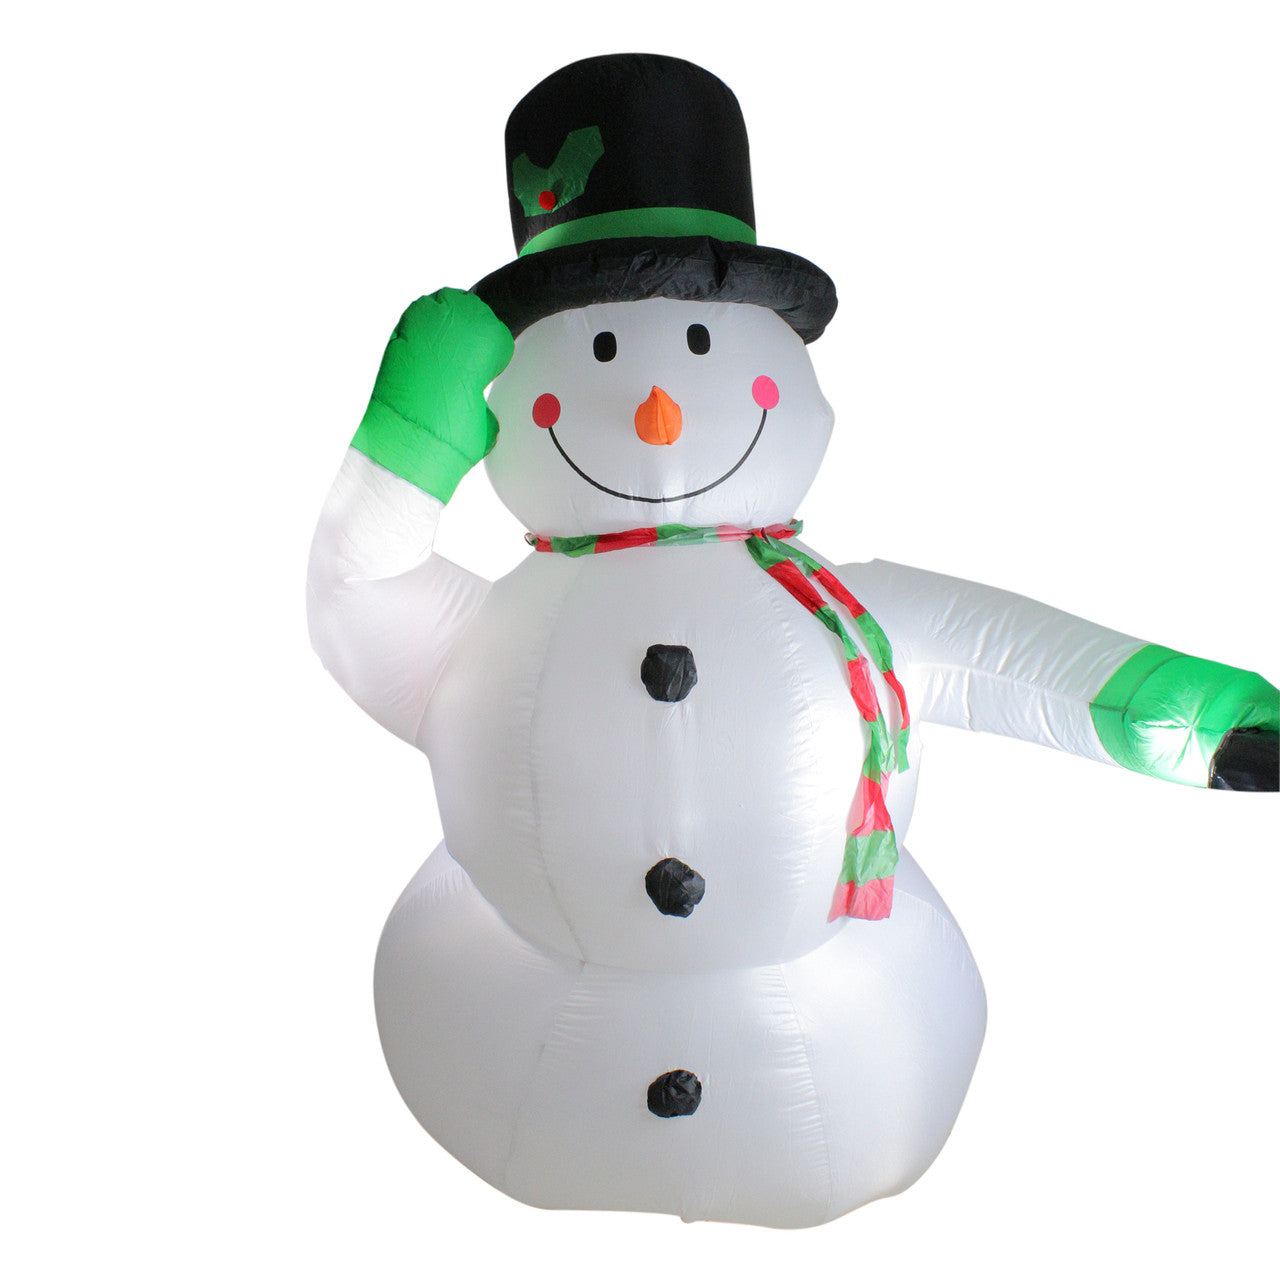 Snowman 8' Inflatable Lighted Outdoor Christmas Decoration